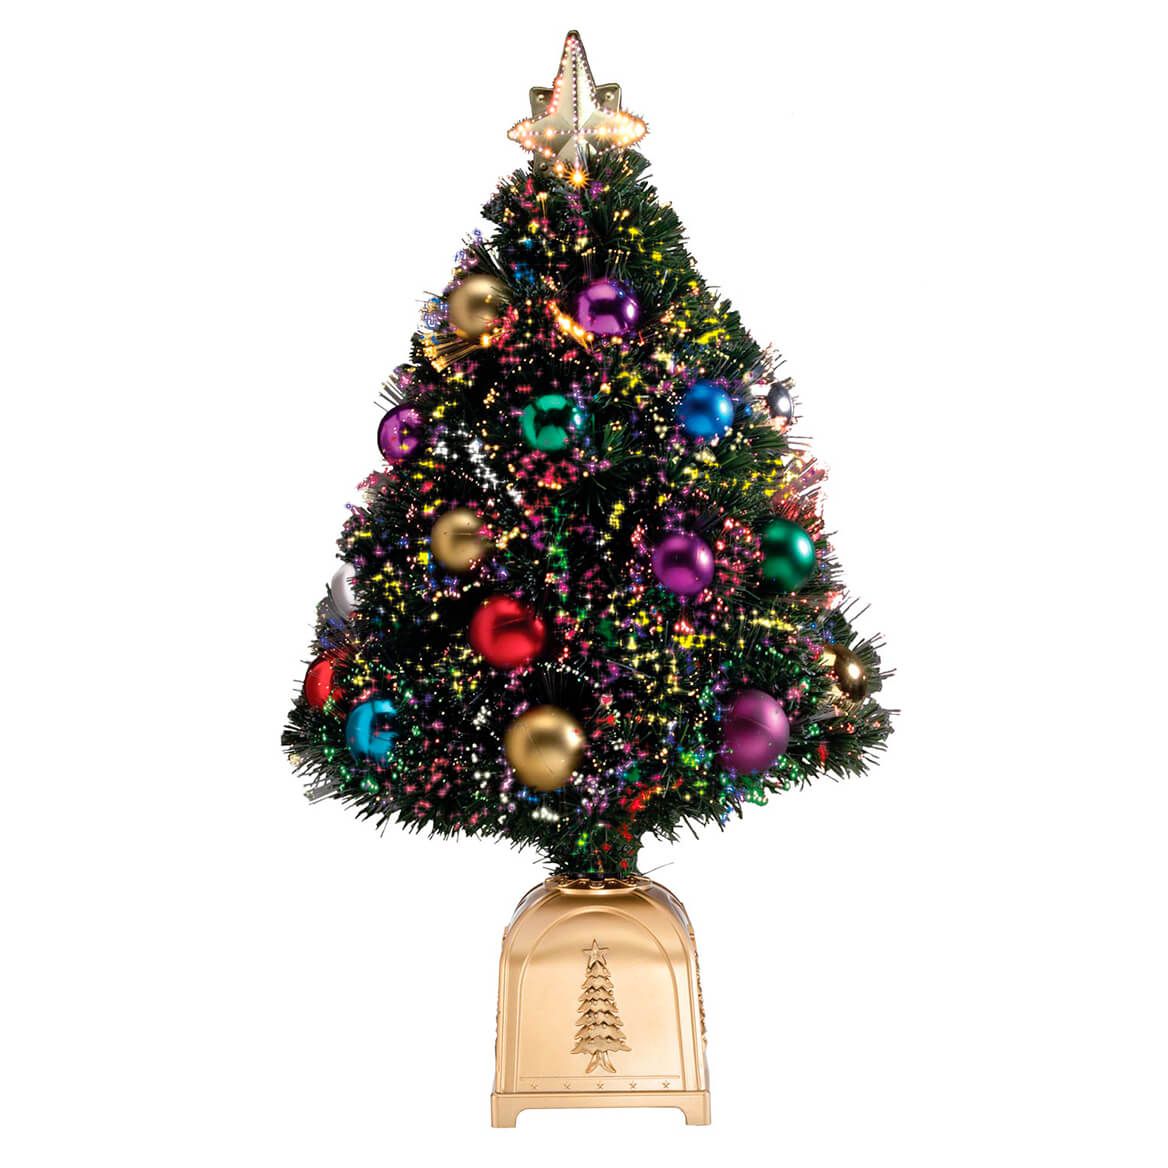 32" Decorated Fiber Optic Christmas Tree by Holiday Peak™ XL + '-' + 302861